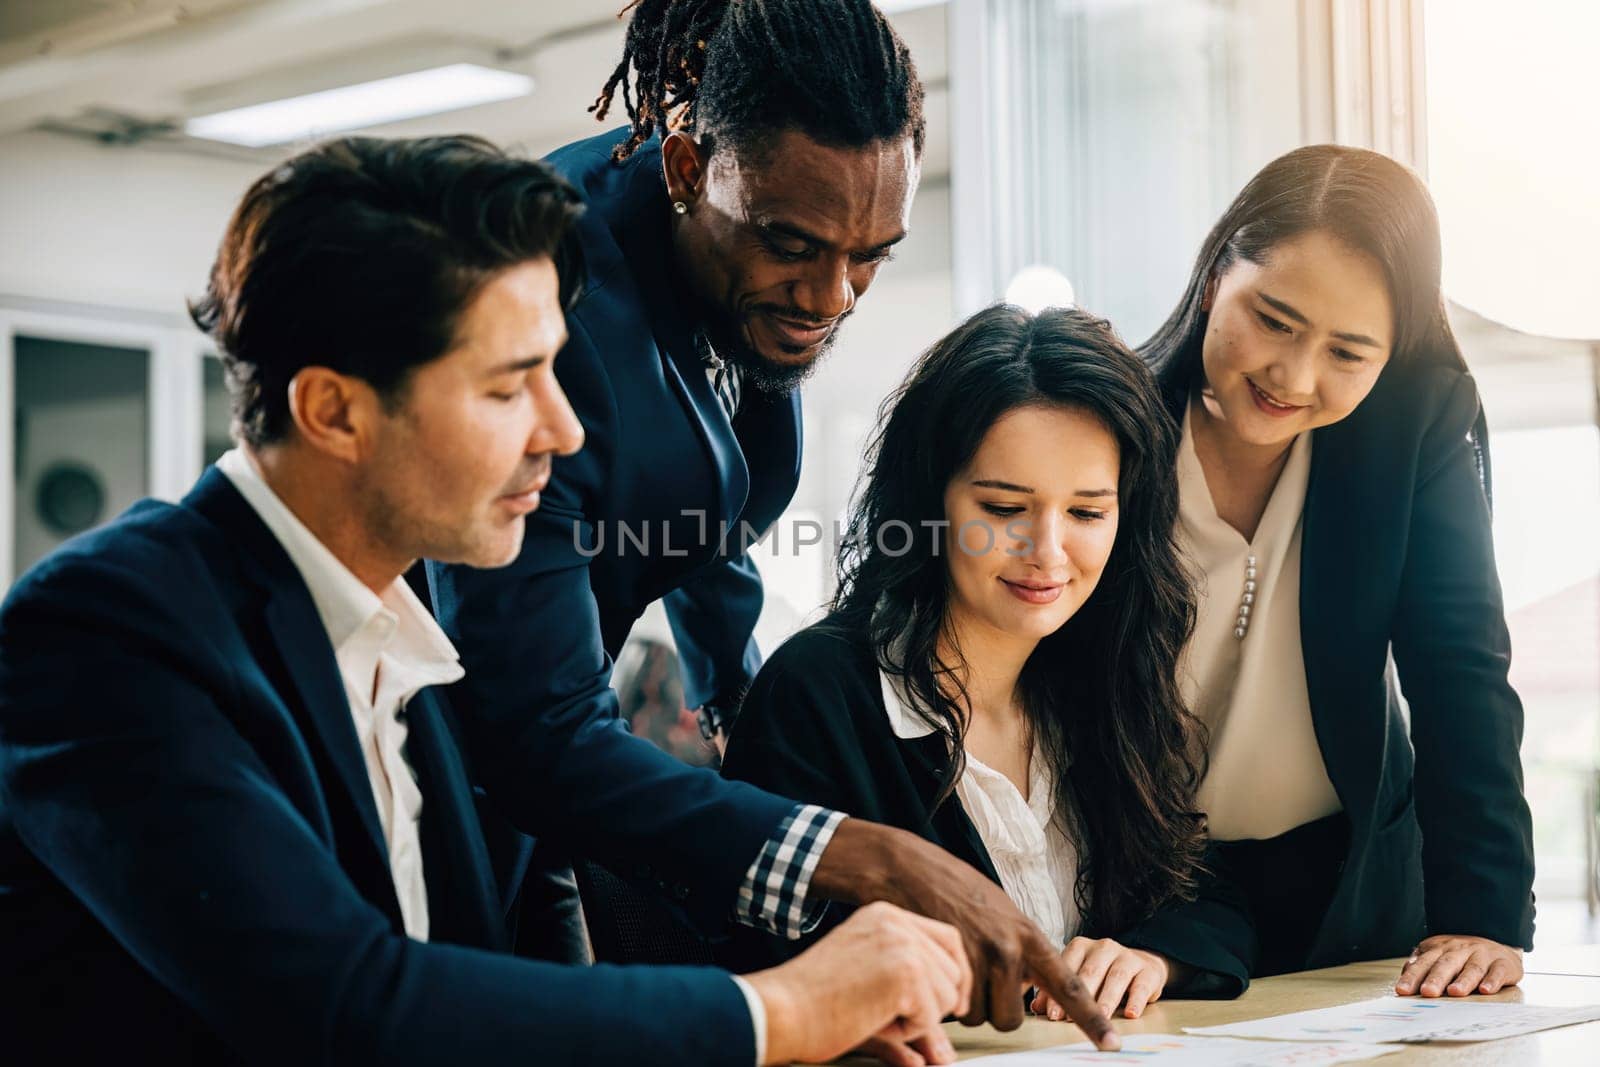 In a meeting room, a global team engages in lively discussion, led by a female leader. Together, they plan and collaborate on strategies, analyze charts, and work with documents for success.